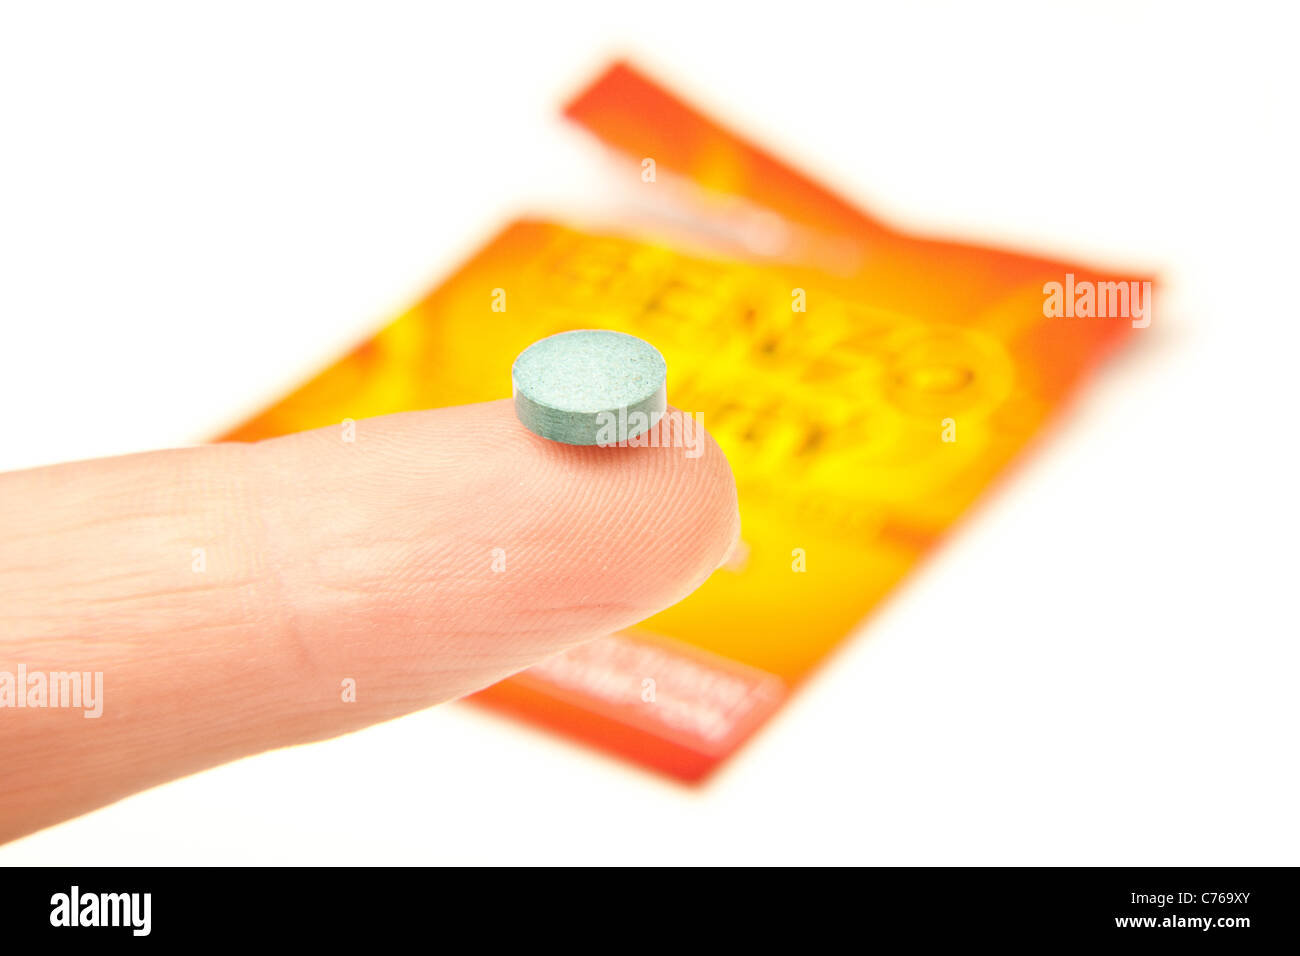 Benzo Fury pellet or pill, (6-APB)  Sold as a  'research chemical' its a analogue of the illegal drug MDMA Stock Photo